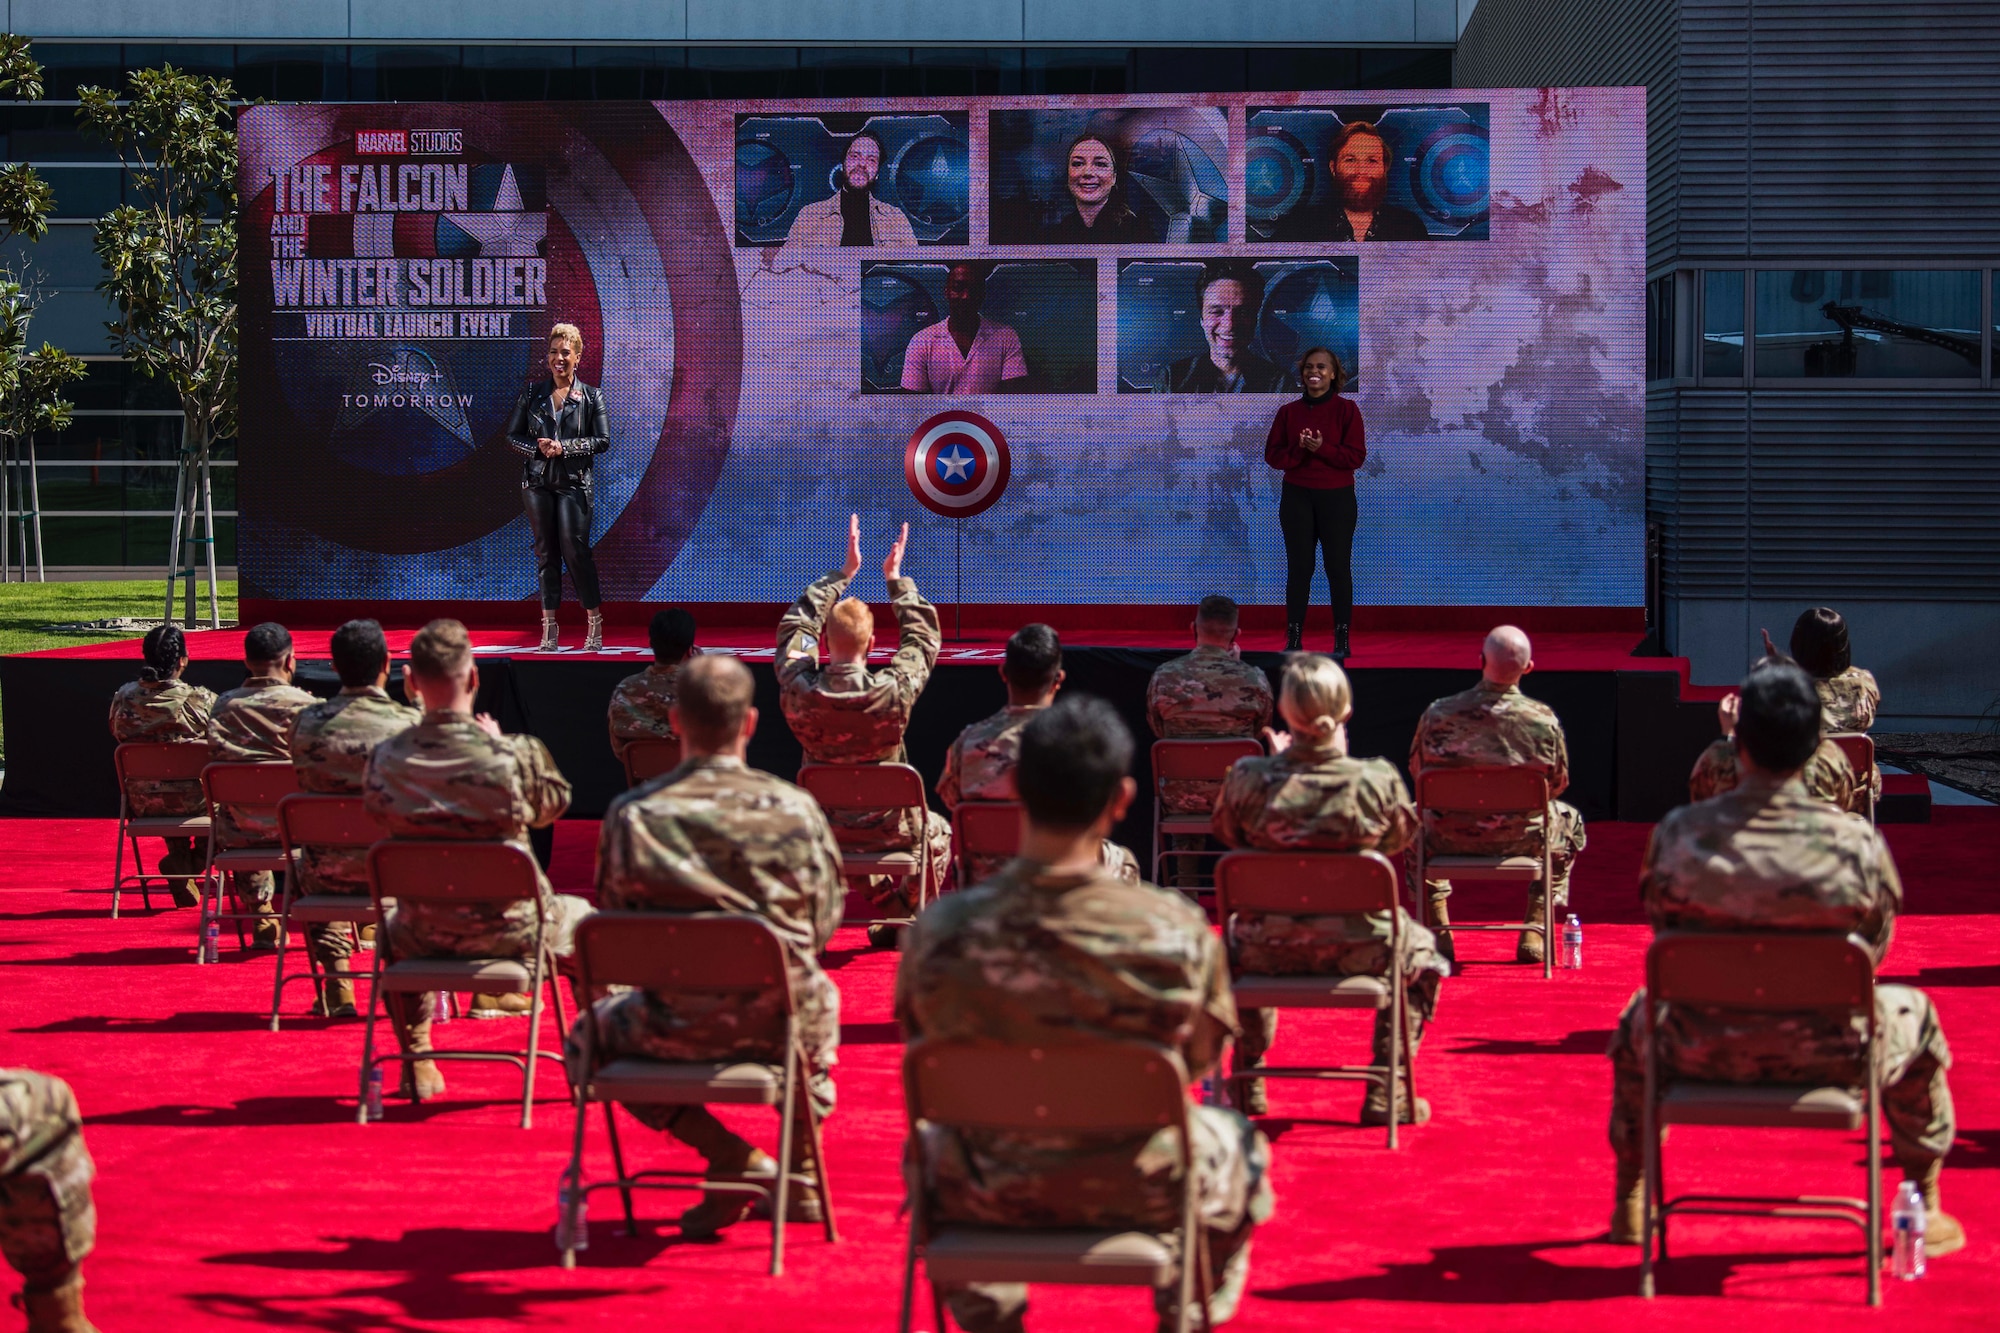 Members of the Space and Missile Systems Center and the 61st Air Base Group cheer on cast members during a question and answer segment of the Falcon and The Winter Soldier virtual launch event at Los Angeles Air Force Base, Calif., March 6, 2021. The cast - Anthony Mackie, Sebastian Stan, Emily VanCamp, Wyatt Russell and Daniel Brühl, answered questions about the show, shared behind-the-scenes facts and expressed their appreciation for support from the U.S. Air and Space Force during filming. (U.S. Space Force photo by Staff Sgt. Luke Kitterman)